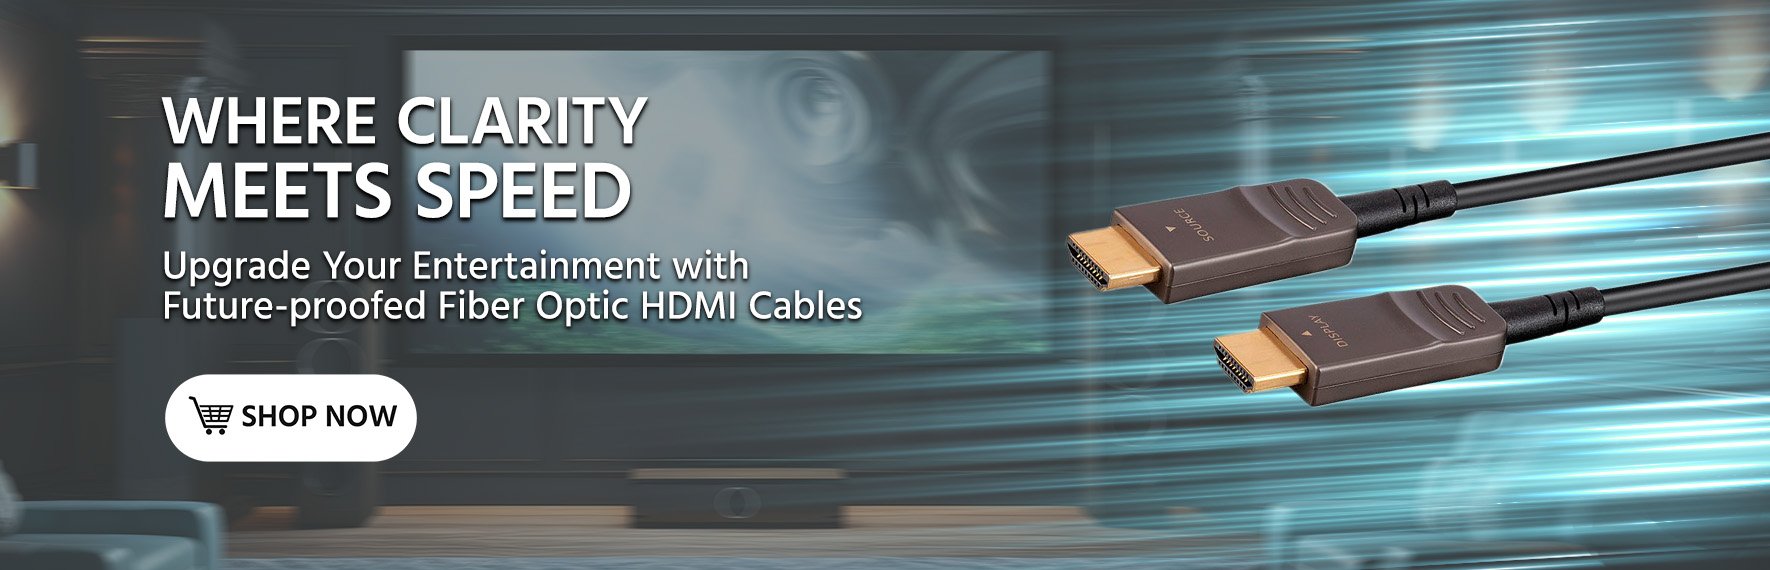 Where Clarity Meets Speed: Elevate Your Entertainment with HDMI Cables Shop Now